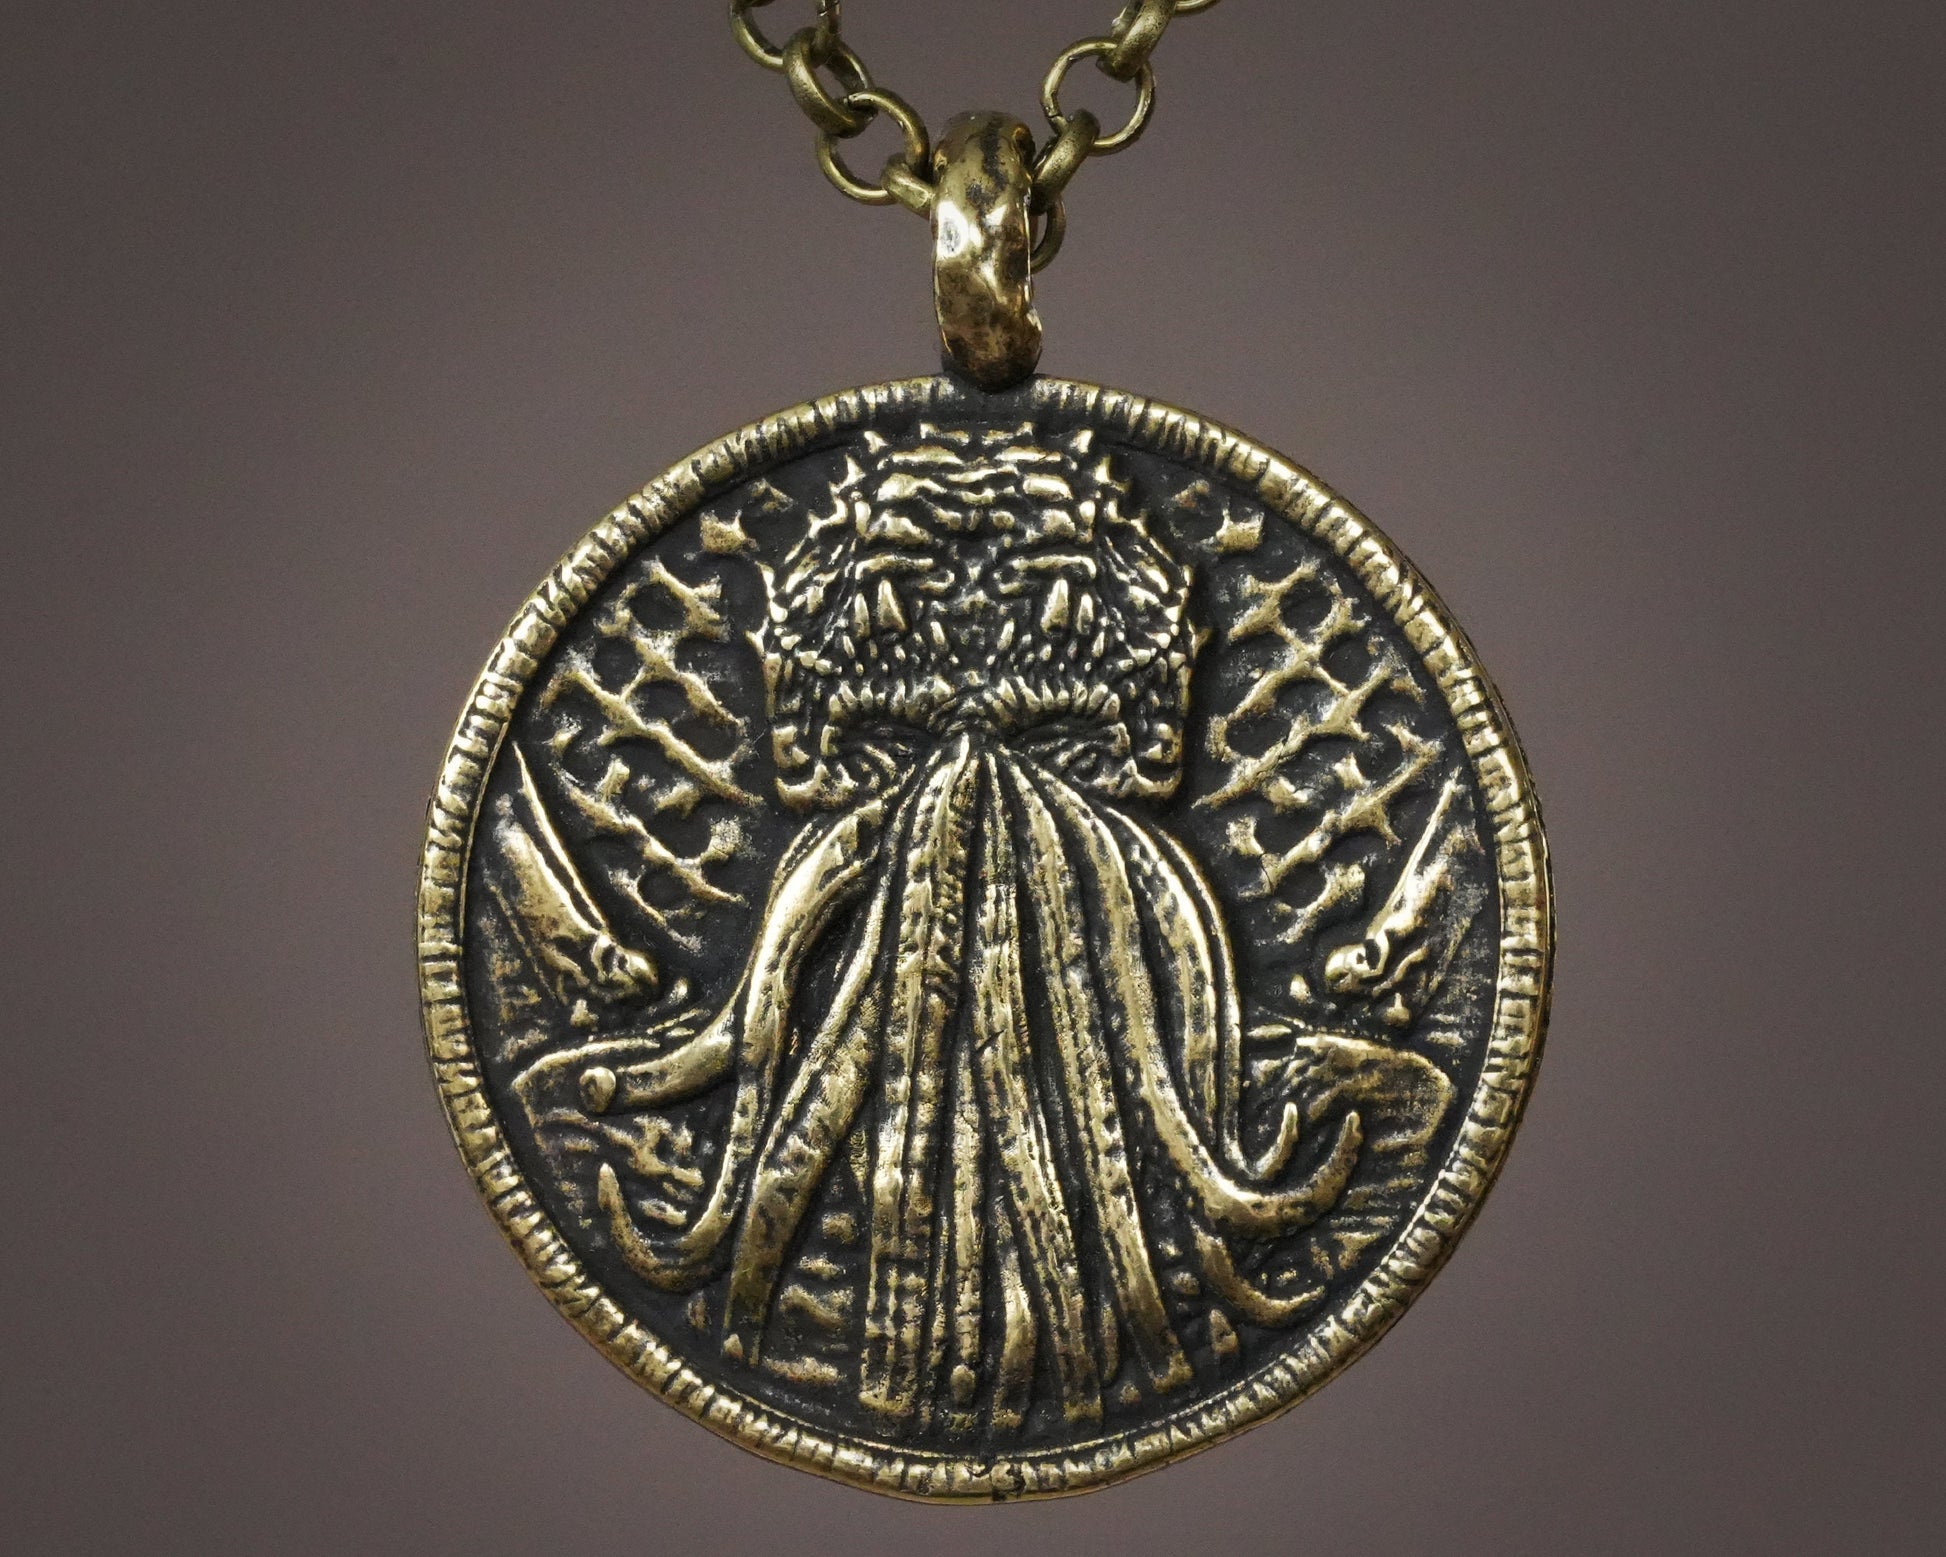 Double Sided Lovecraft Cthulhu Octopus Necklace Pendant With Tentacles Jewelry Amulet Solid Silver / Brass - Baldur Jewelry